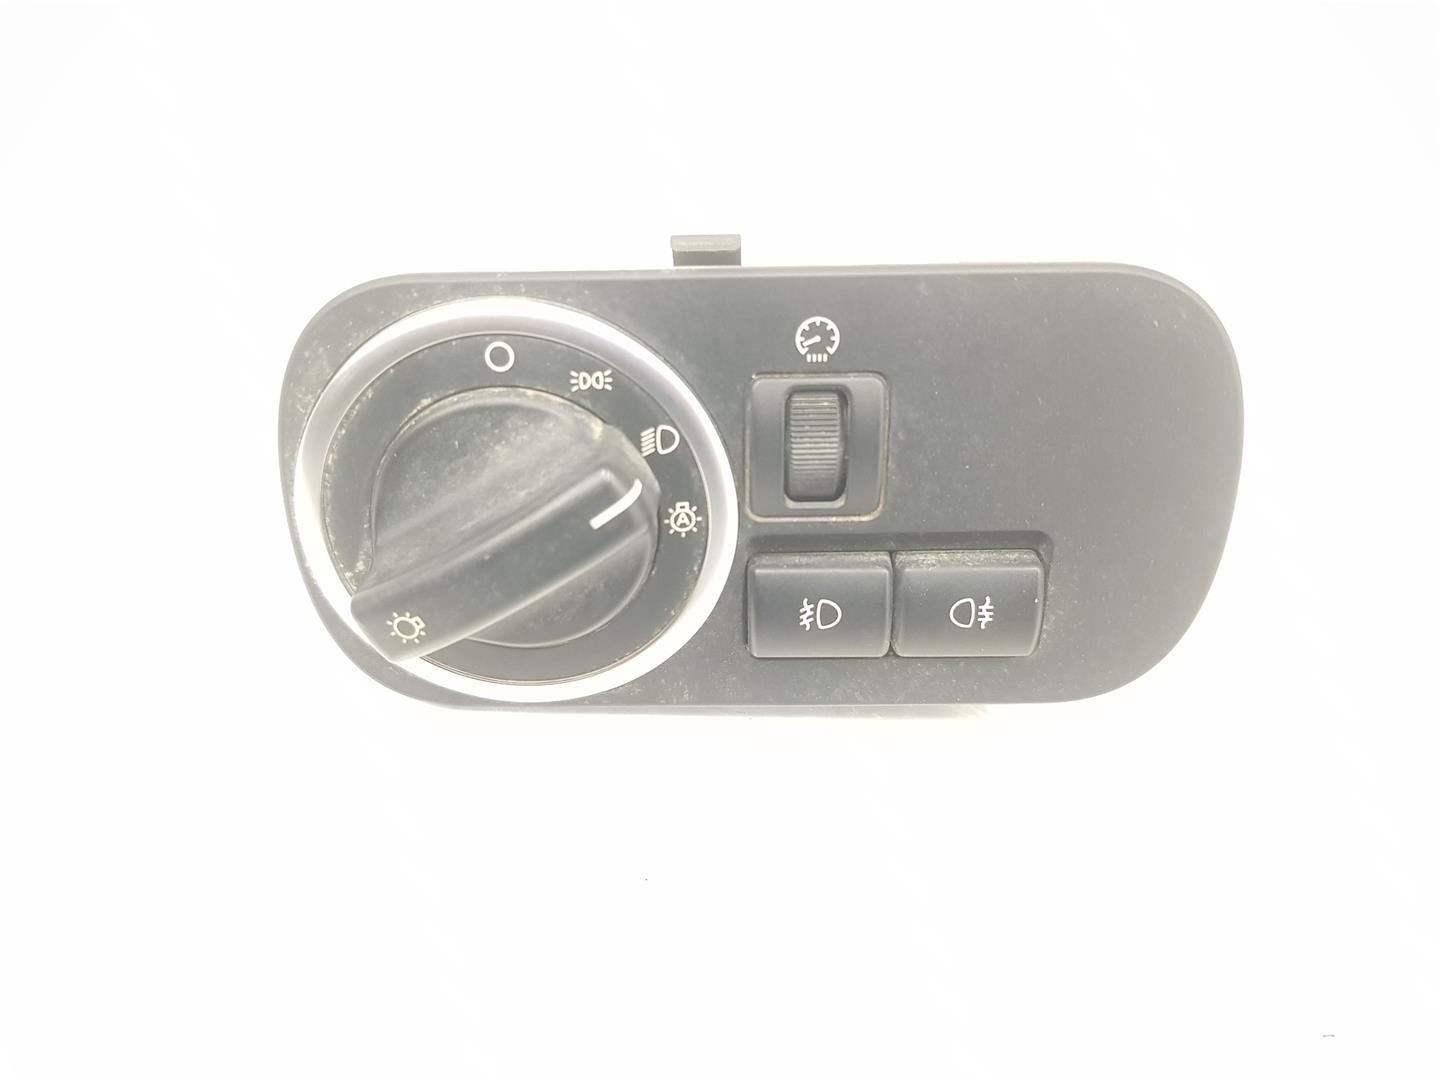 LAND ROVER Discovery 4 generation (2009-2016) Headlight Switch Control Unit LR010876, AH2213A024AC 24131194